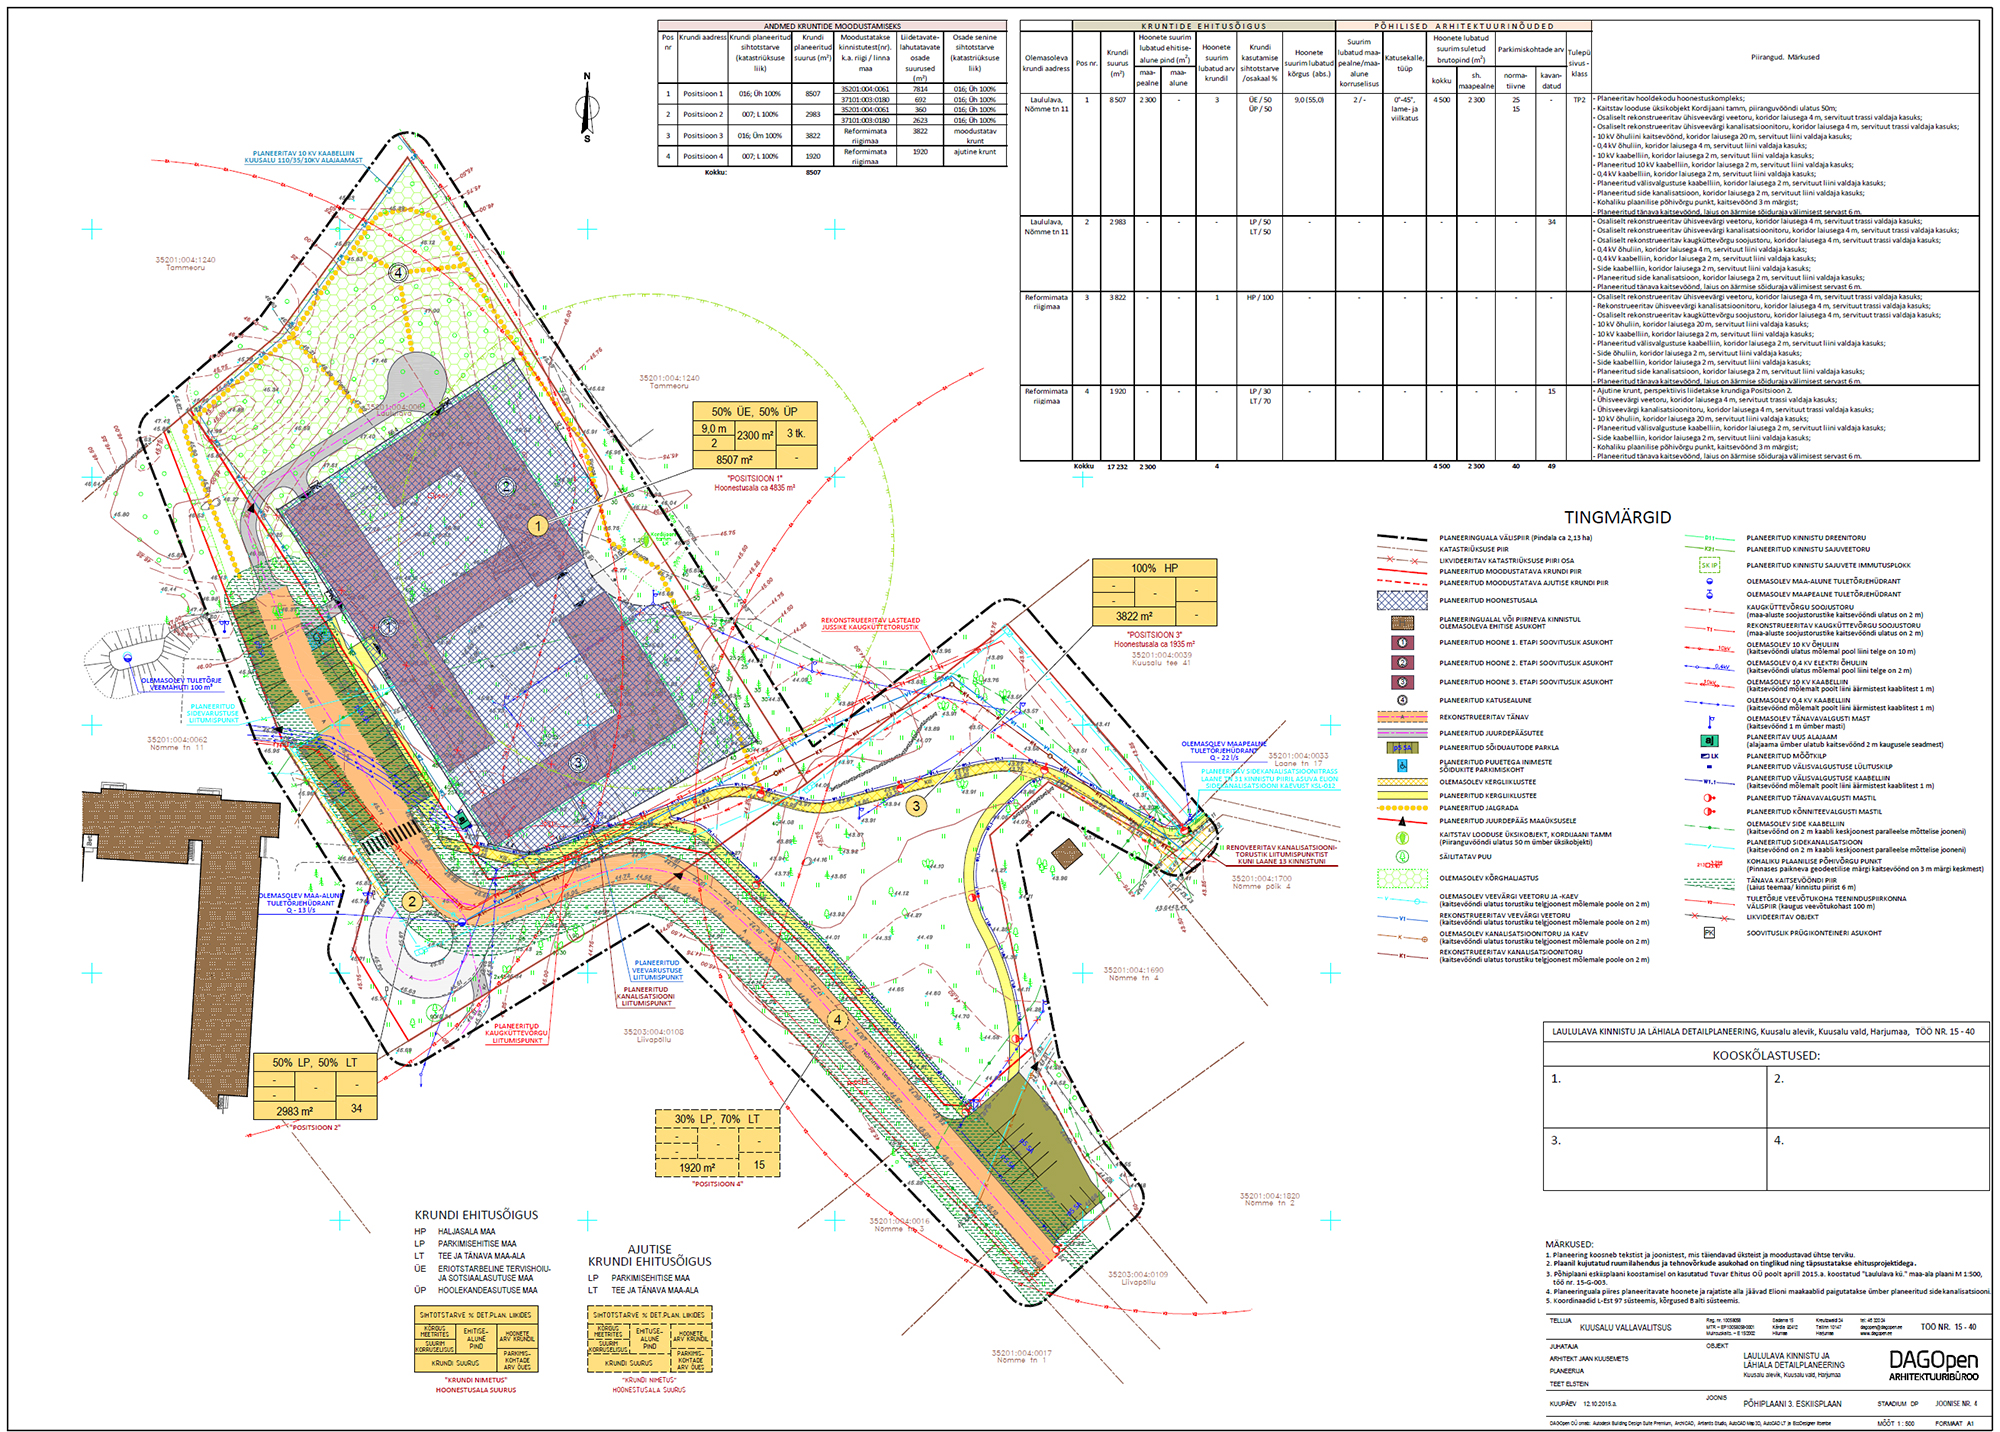 Detail planning of Tallinn Song Festival Grounds property and neighbouring area